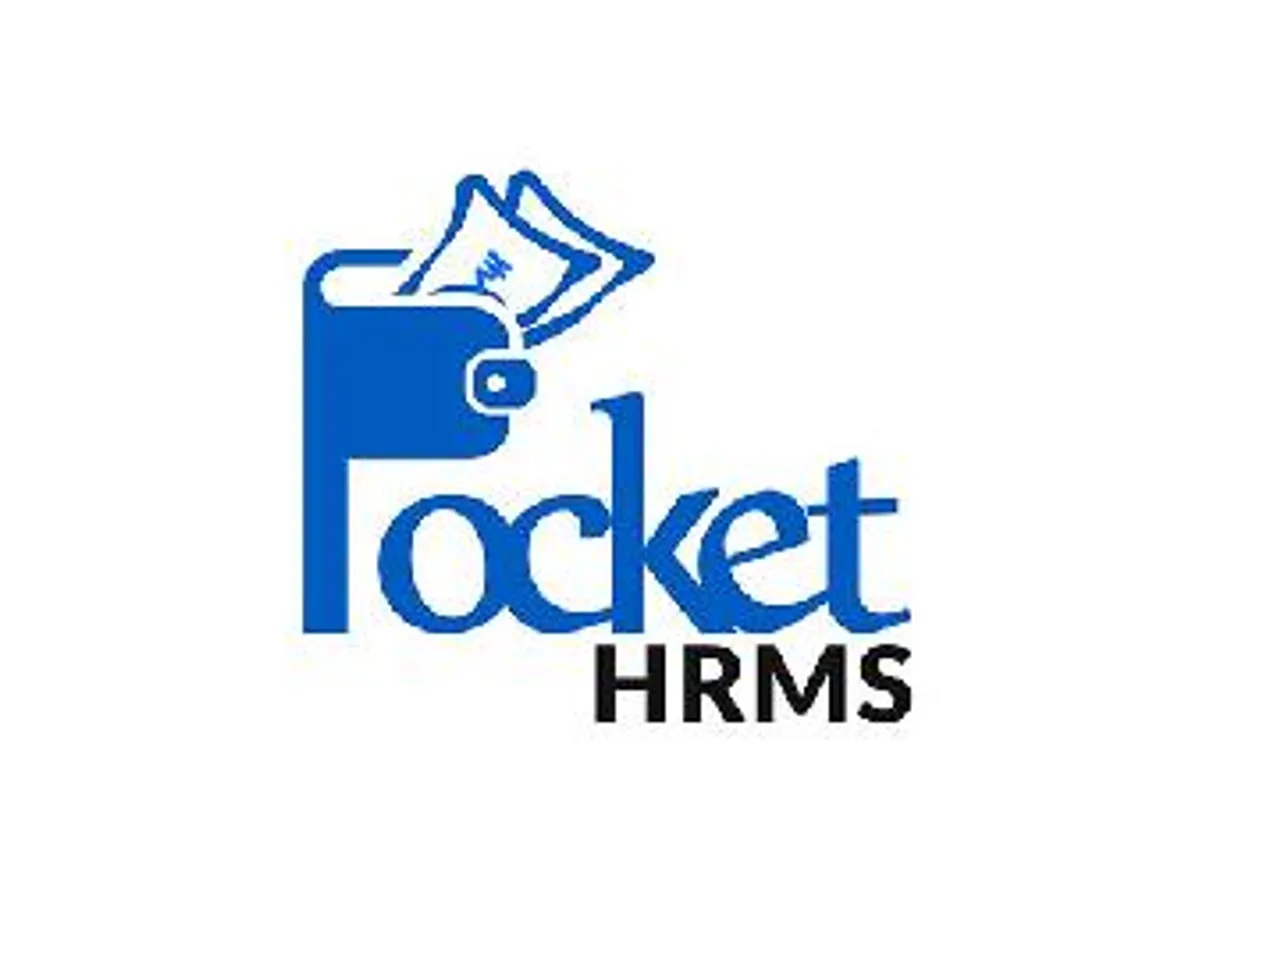 Pocket HRMS and Fi Money Join Hands to Offer No Cost HRMS and Neo Banking Experience